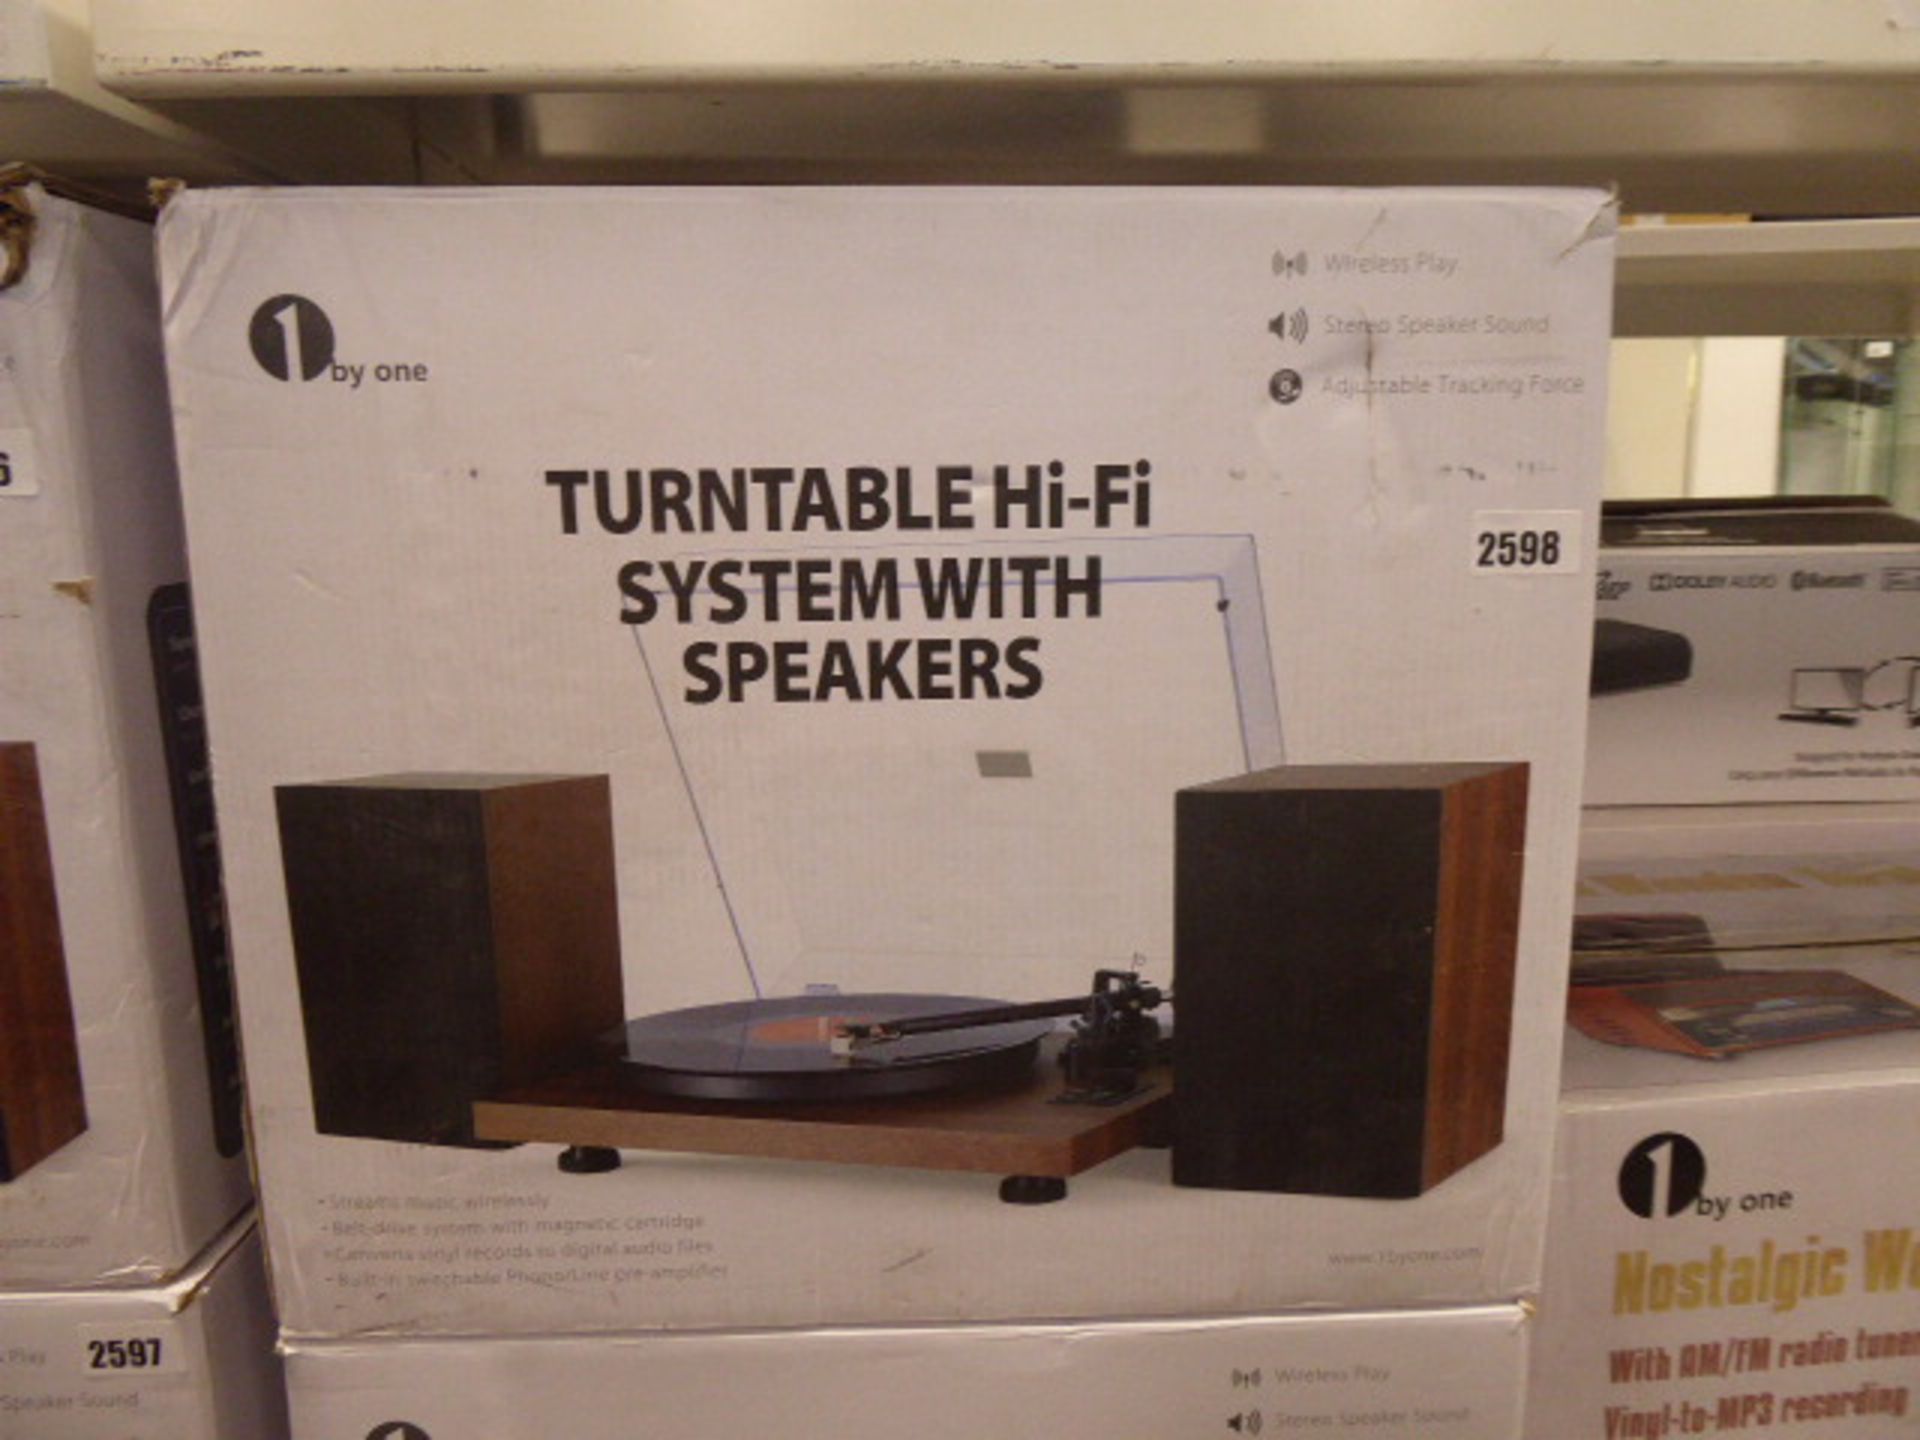 One by One turntable hi-fi system with speakers in box